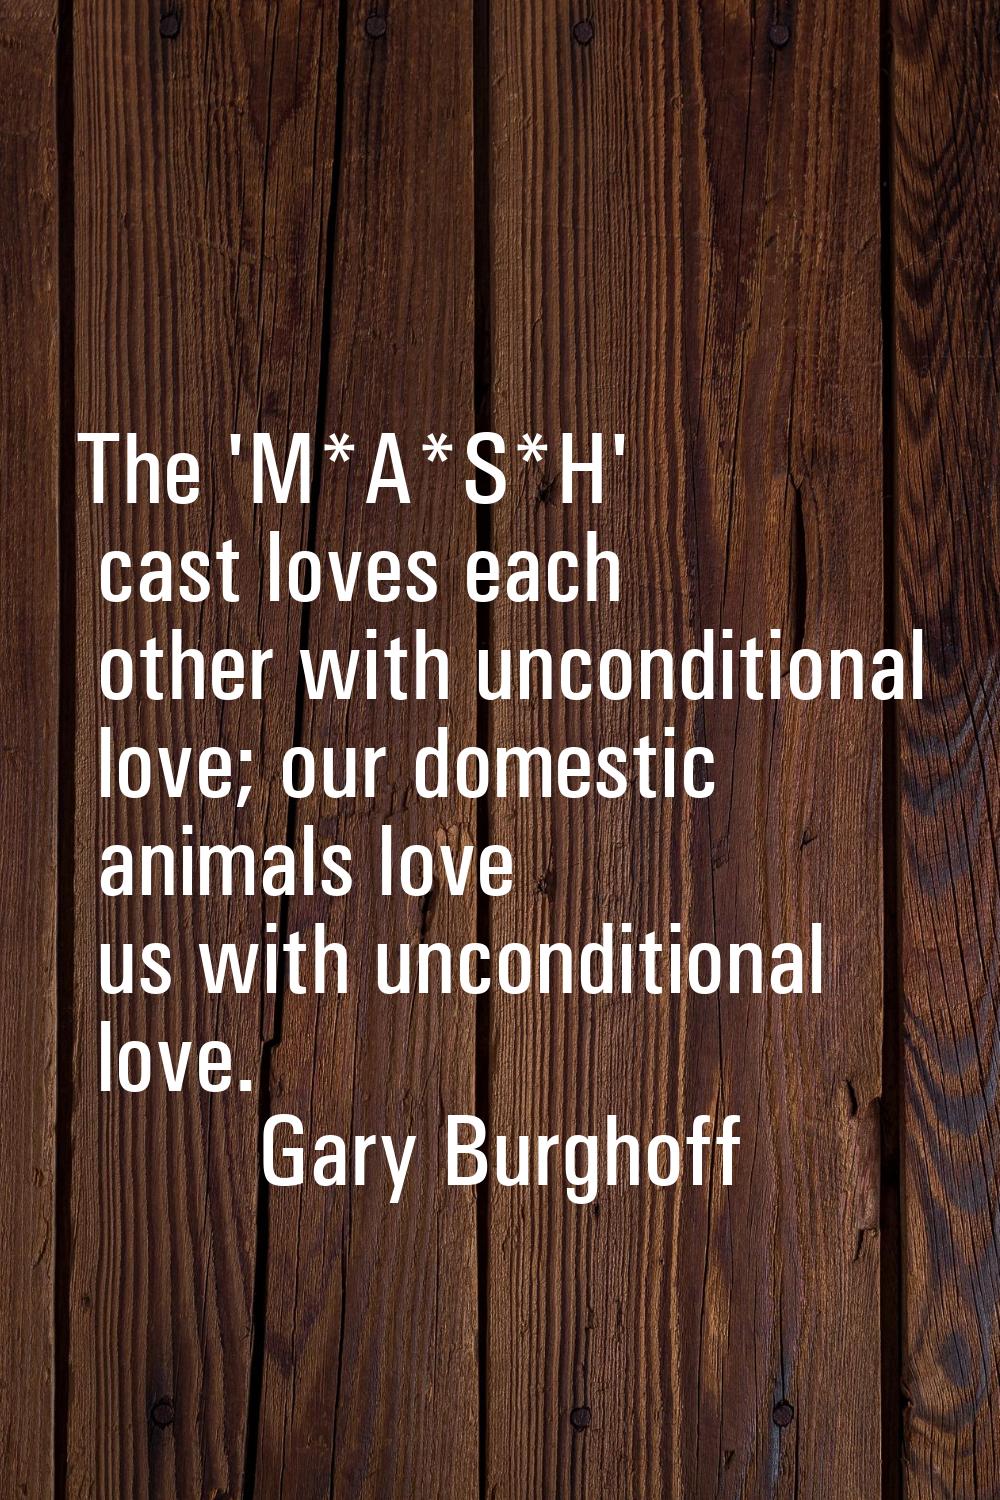 The 'M*A*S*H' cast loves each other with unconditional love; our domestic animals love us with unco